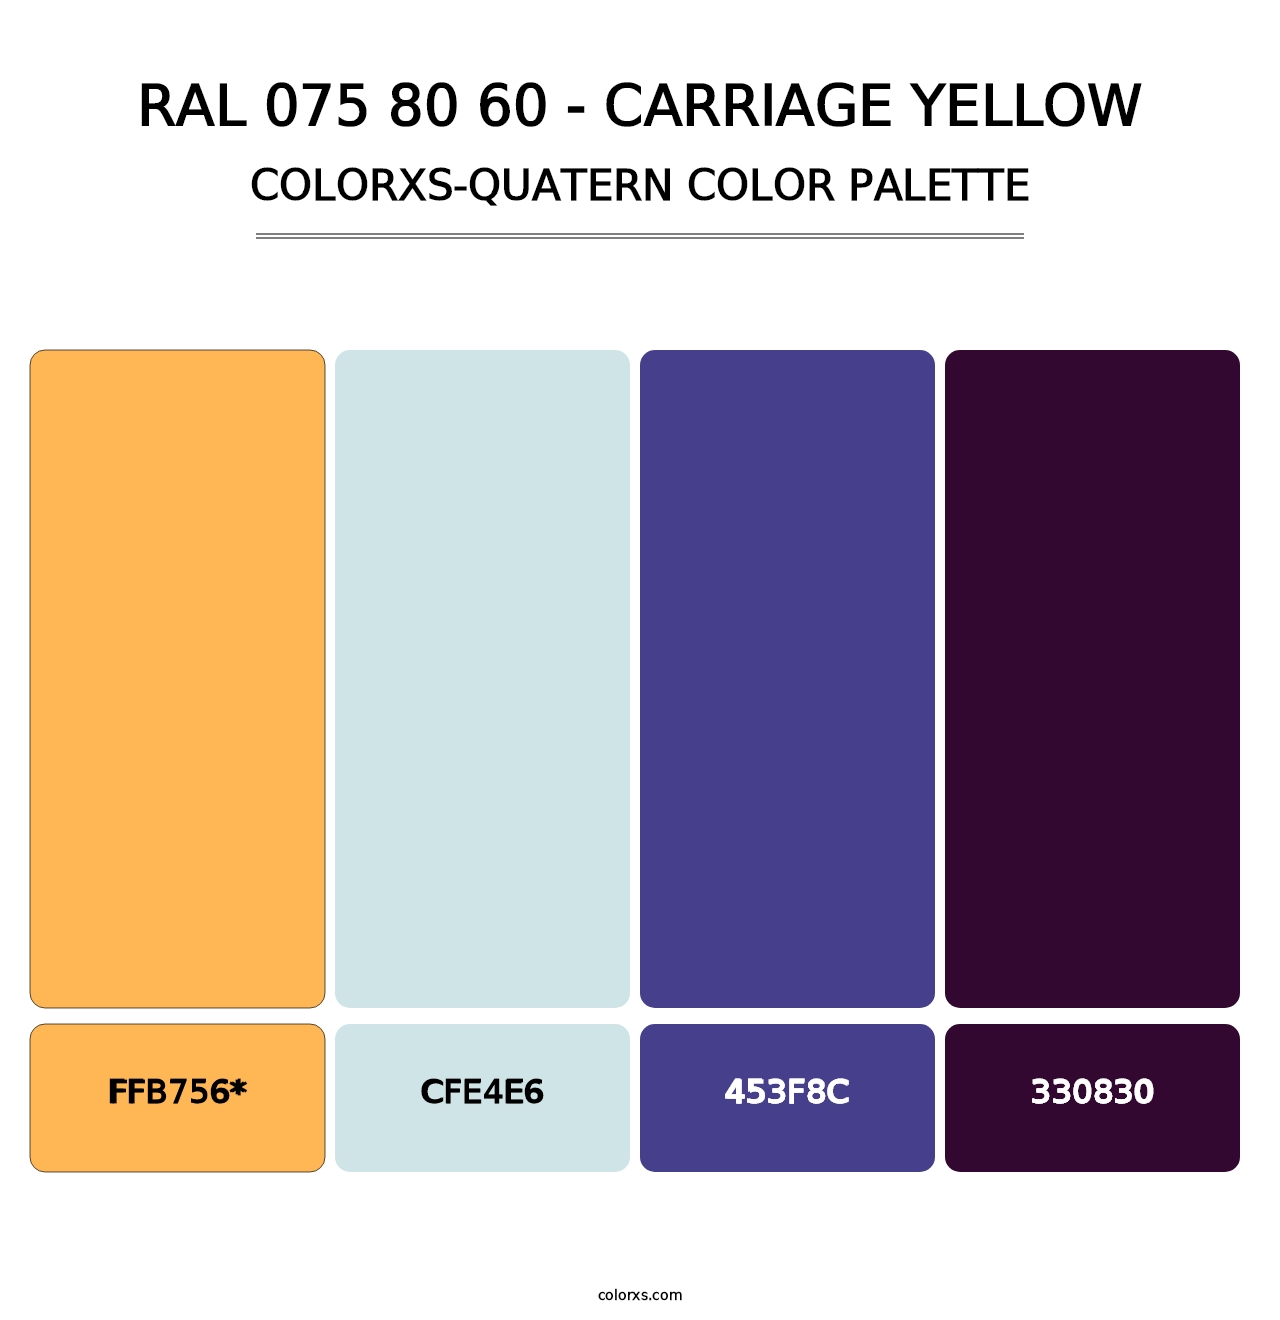 RAL 075 80 60 - Carriage Yellow - Colorxs Quatern Palette